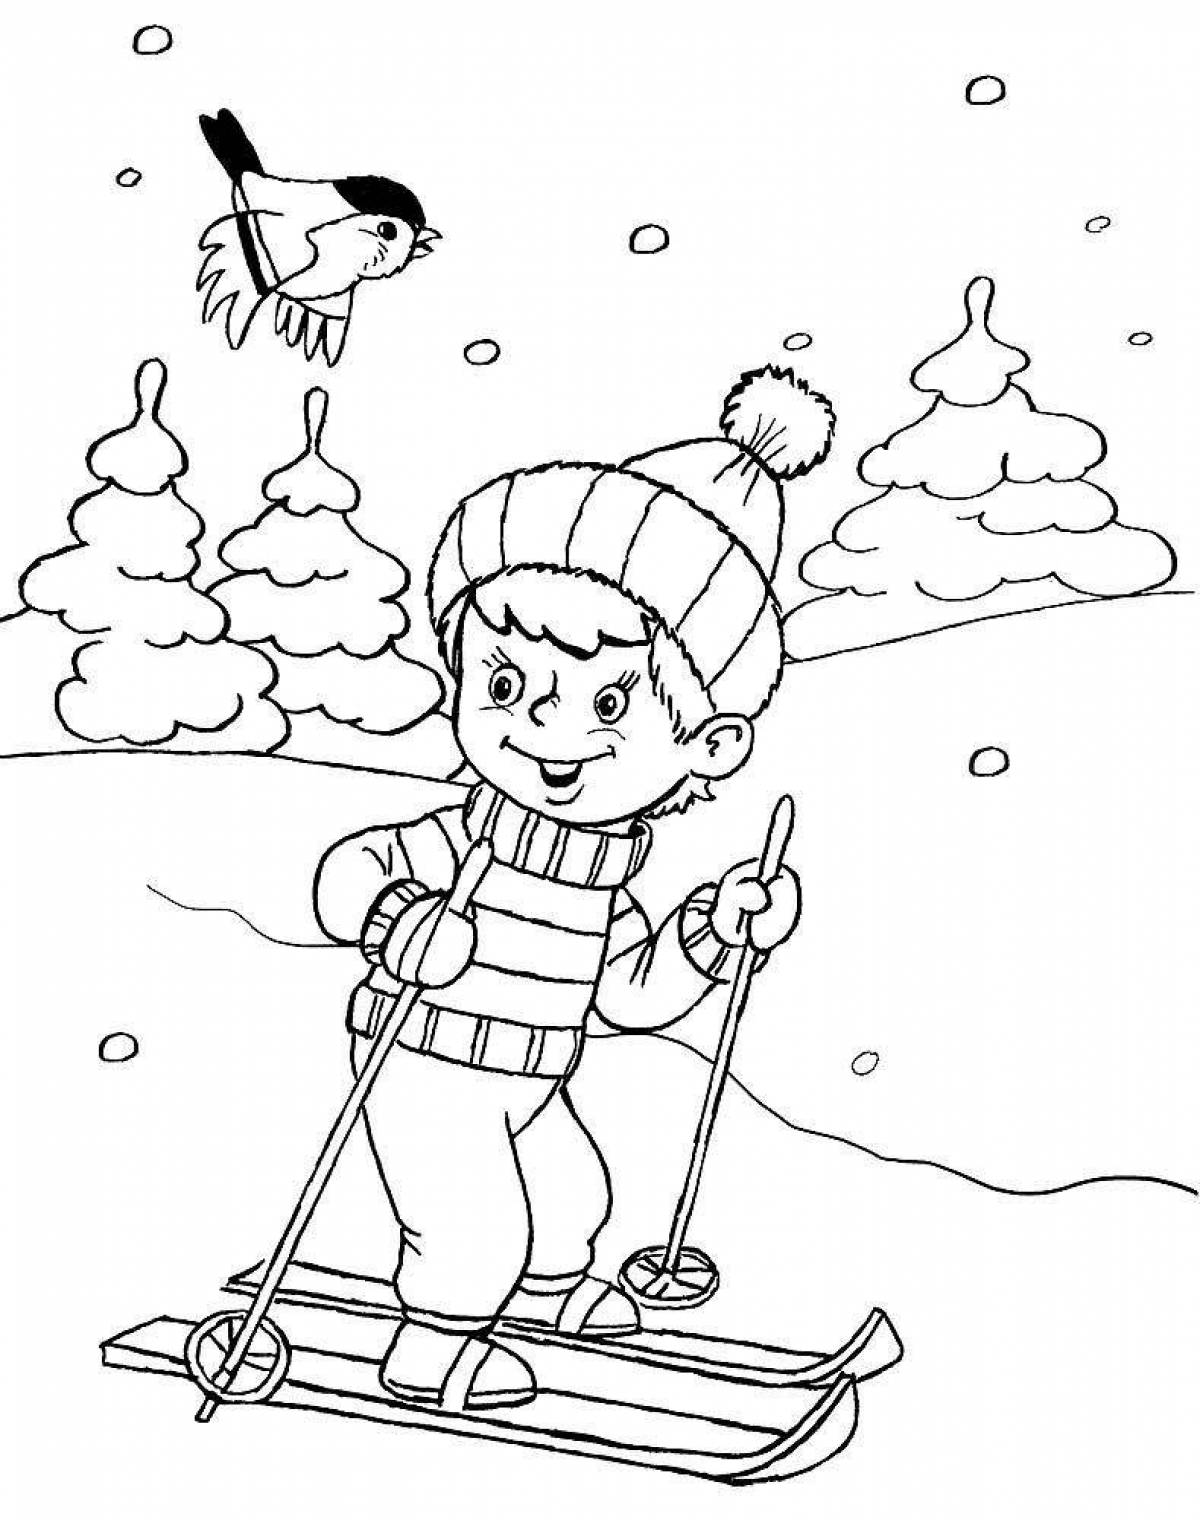 Animated coloring book winter fun for kids